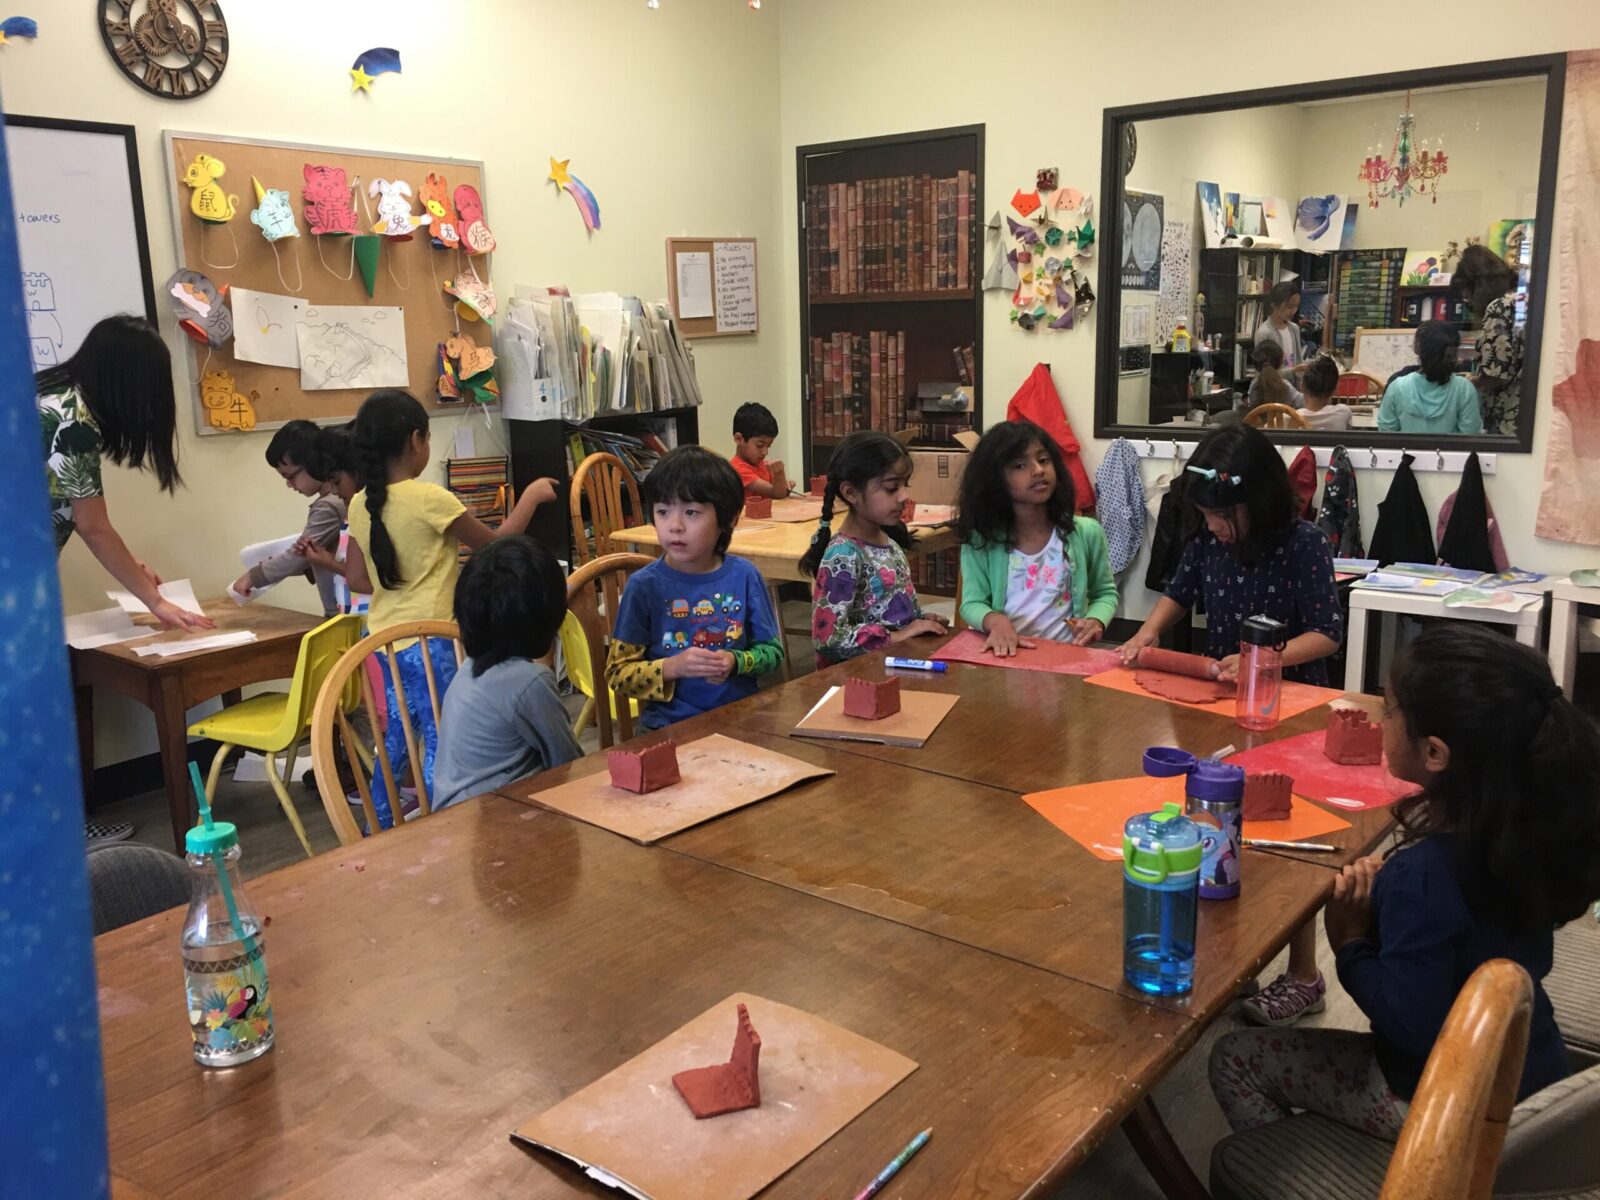 Kids making their own clay crafts